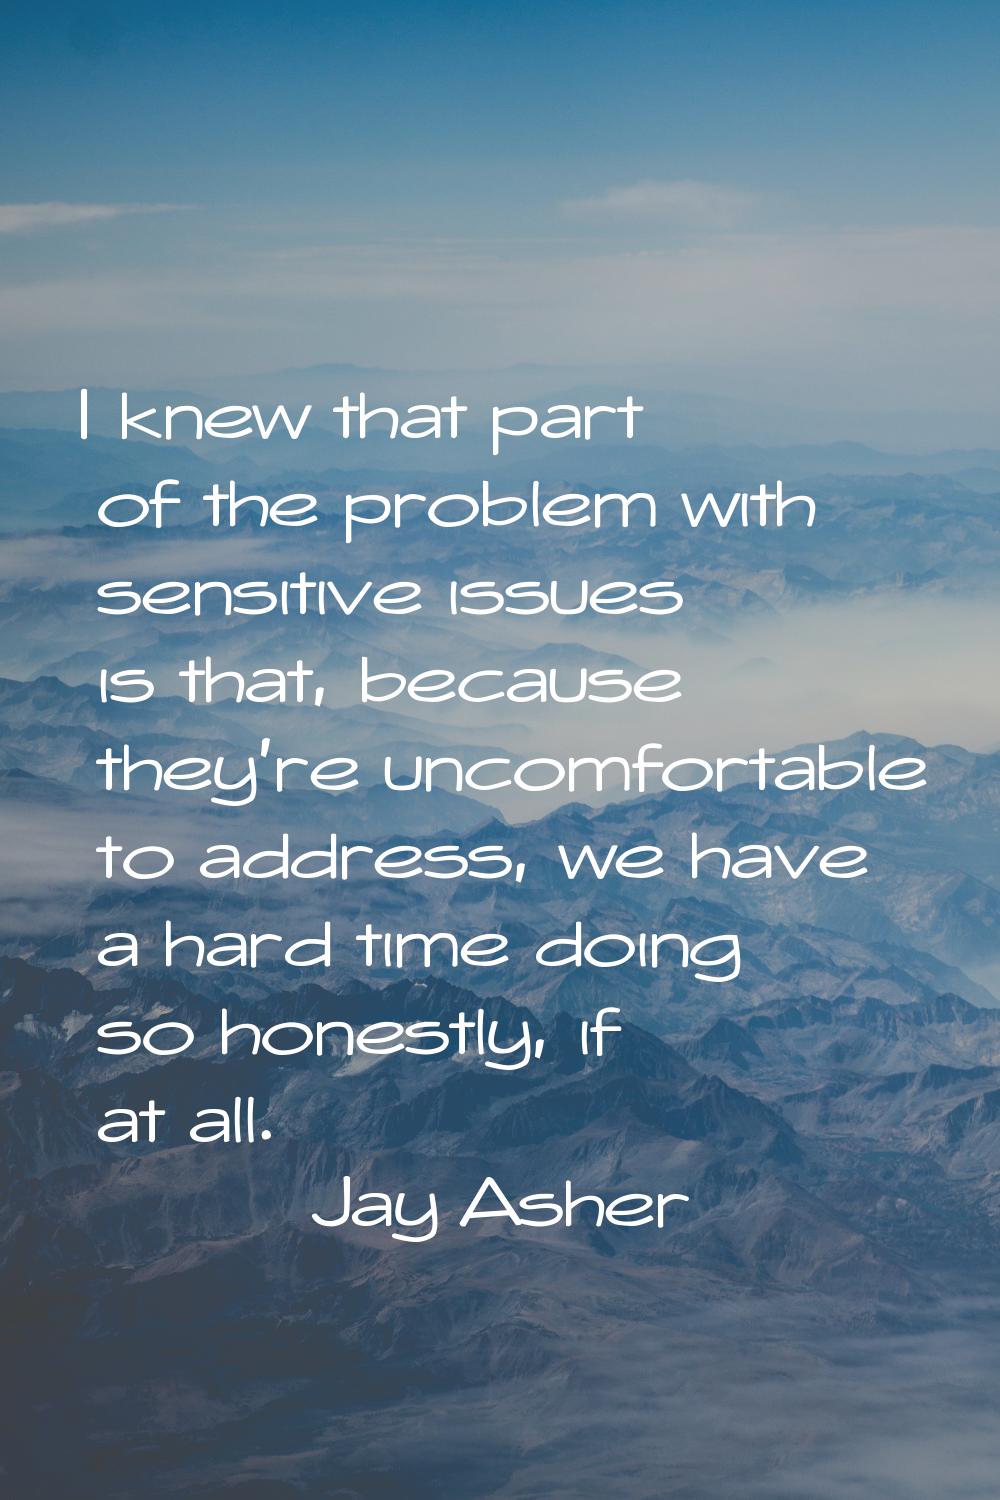 I knew that part of the problem with sensitive issues is that, because they're uncomfortable to add